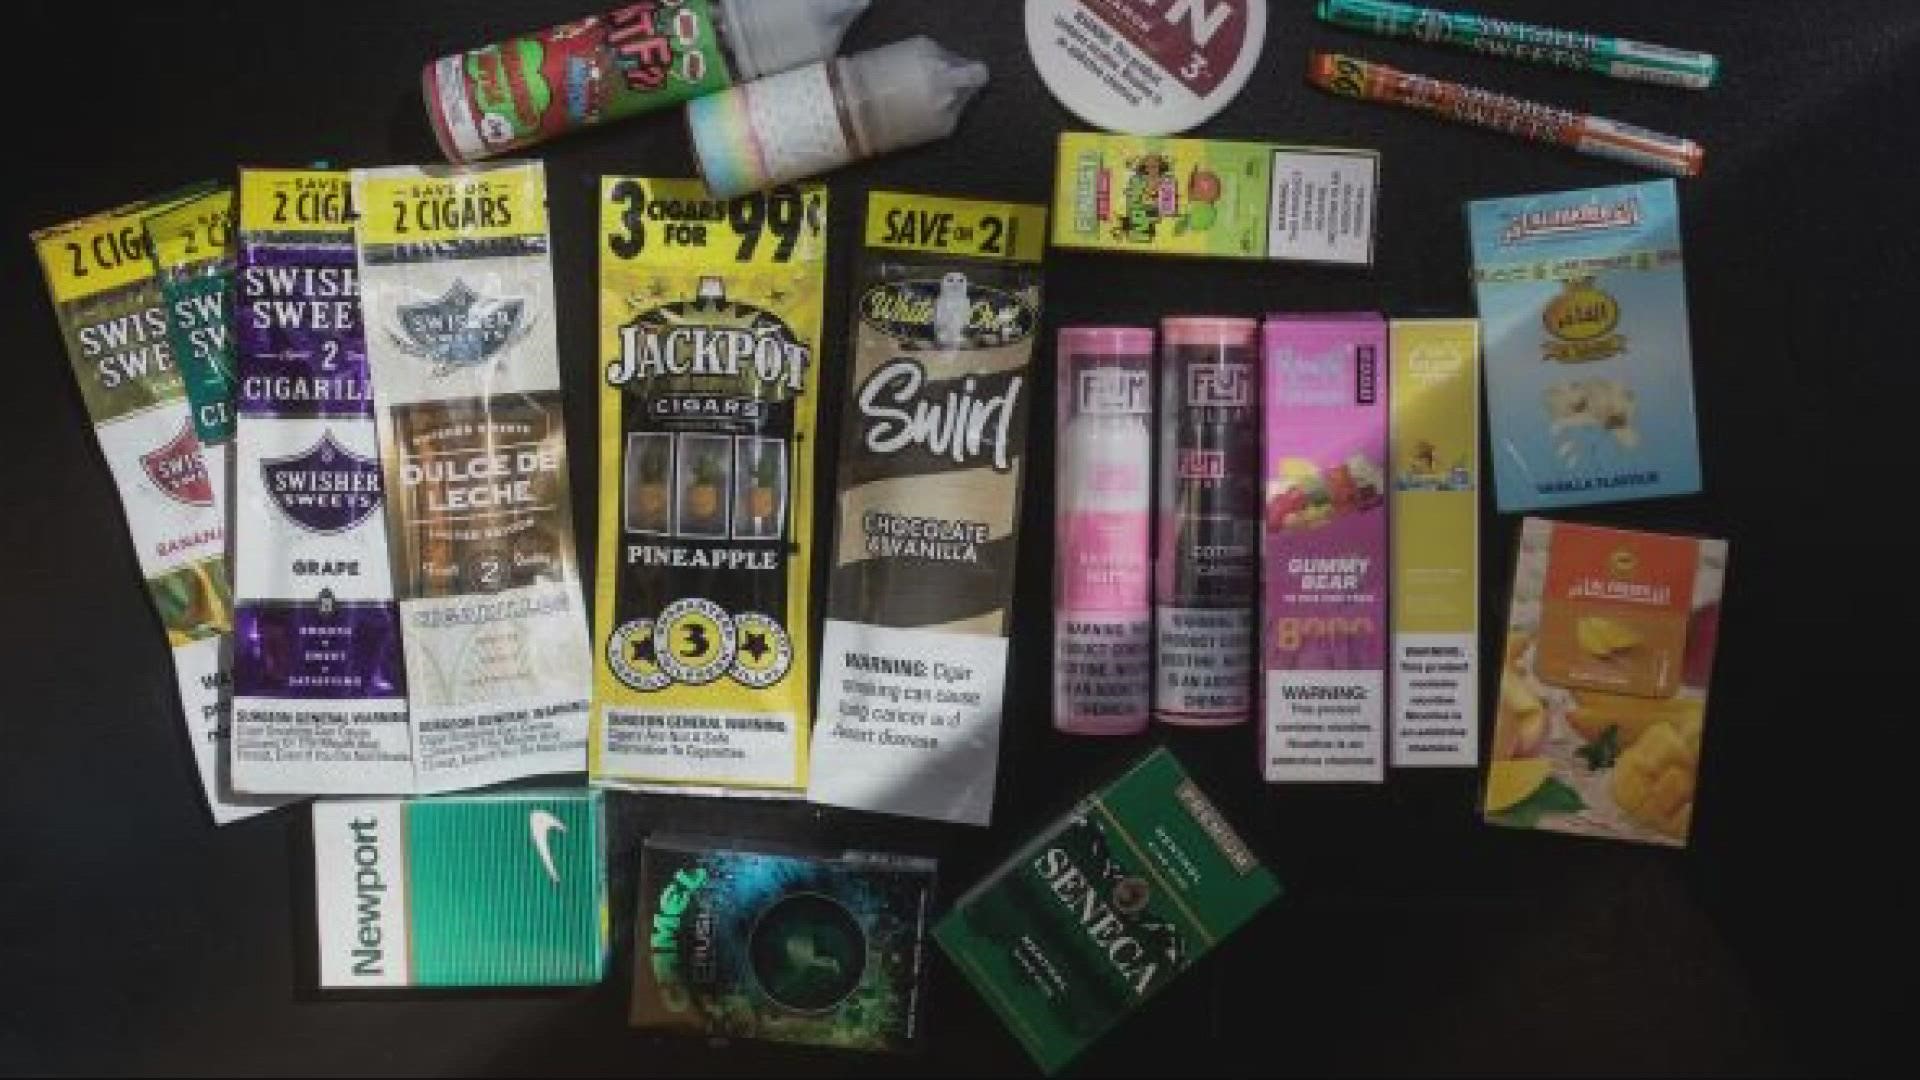 Health officer Dr. Jennifer Vines says teens are still gaining access to vape products. Washington County enacted a similar ban last year.